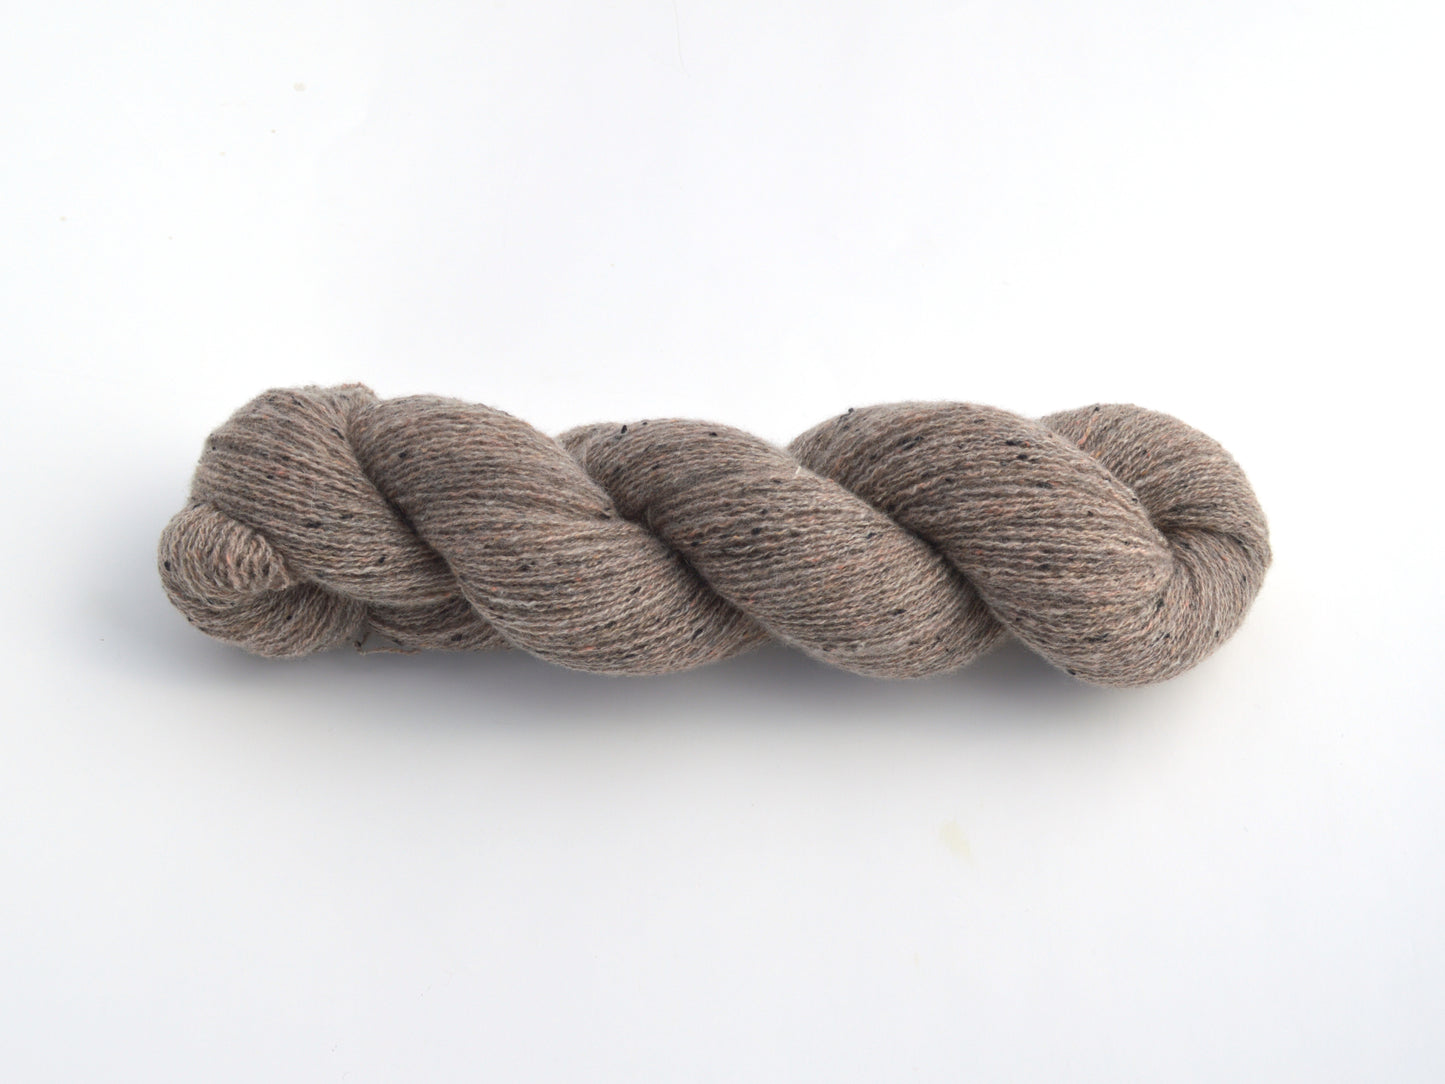 Lace Weight Cashmere Recycled Yarn in Taupe Tweed